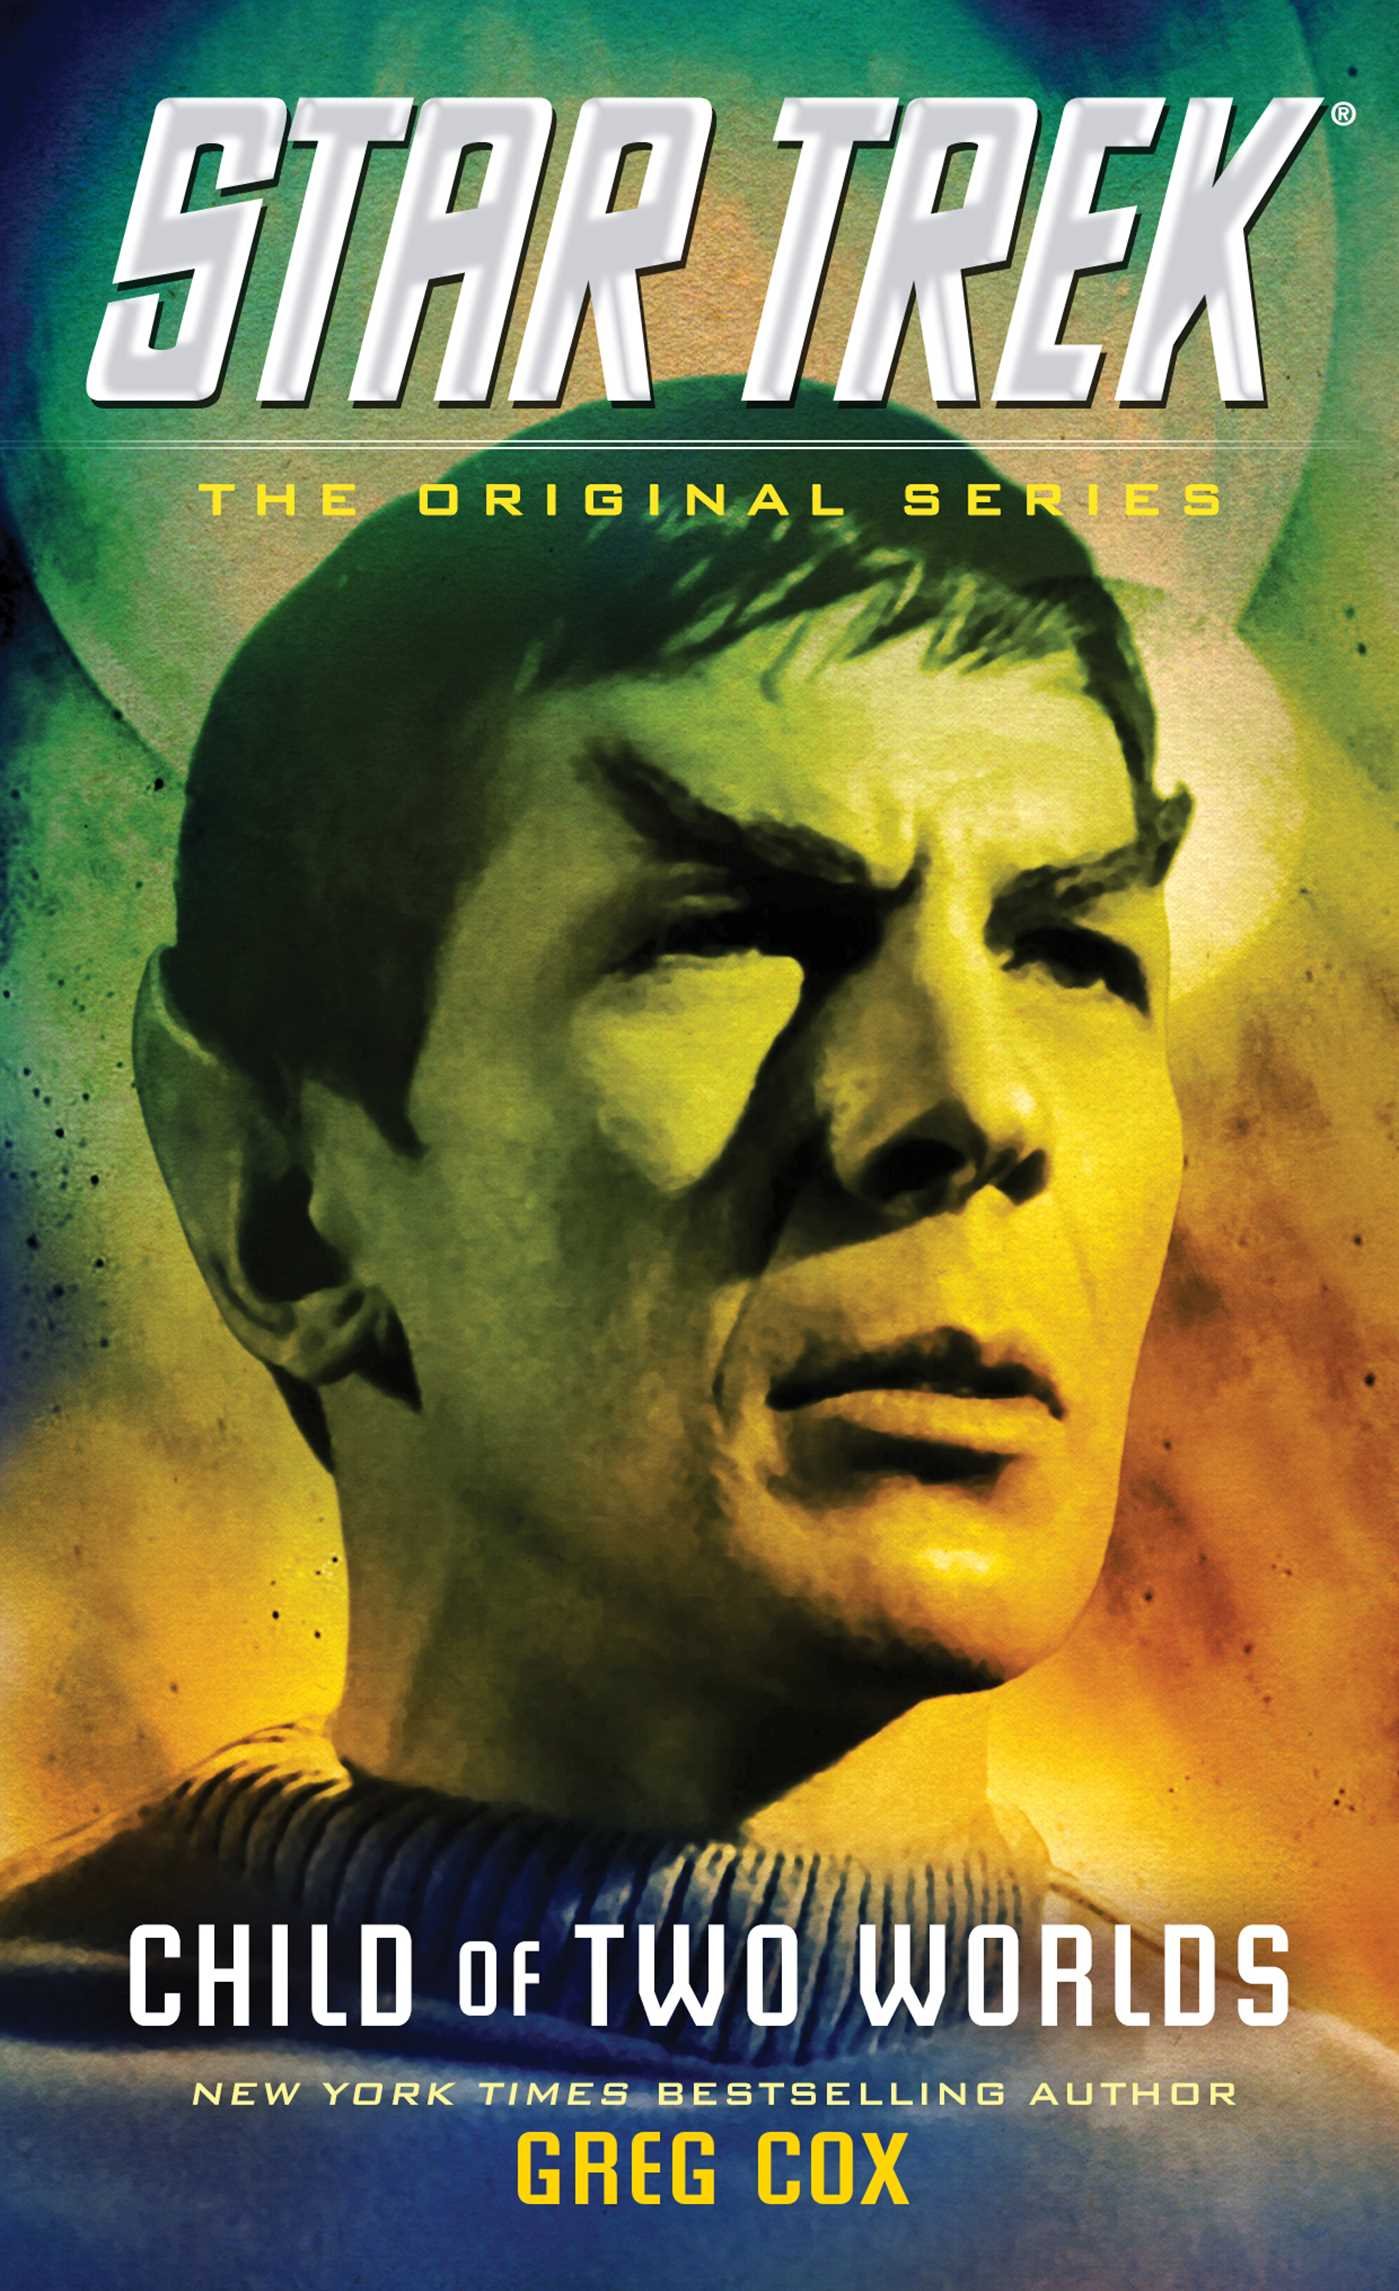 “Star Trek: The Original Series: Child of Two Worlds” Review by Roqoodepot.wordpress.com